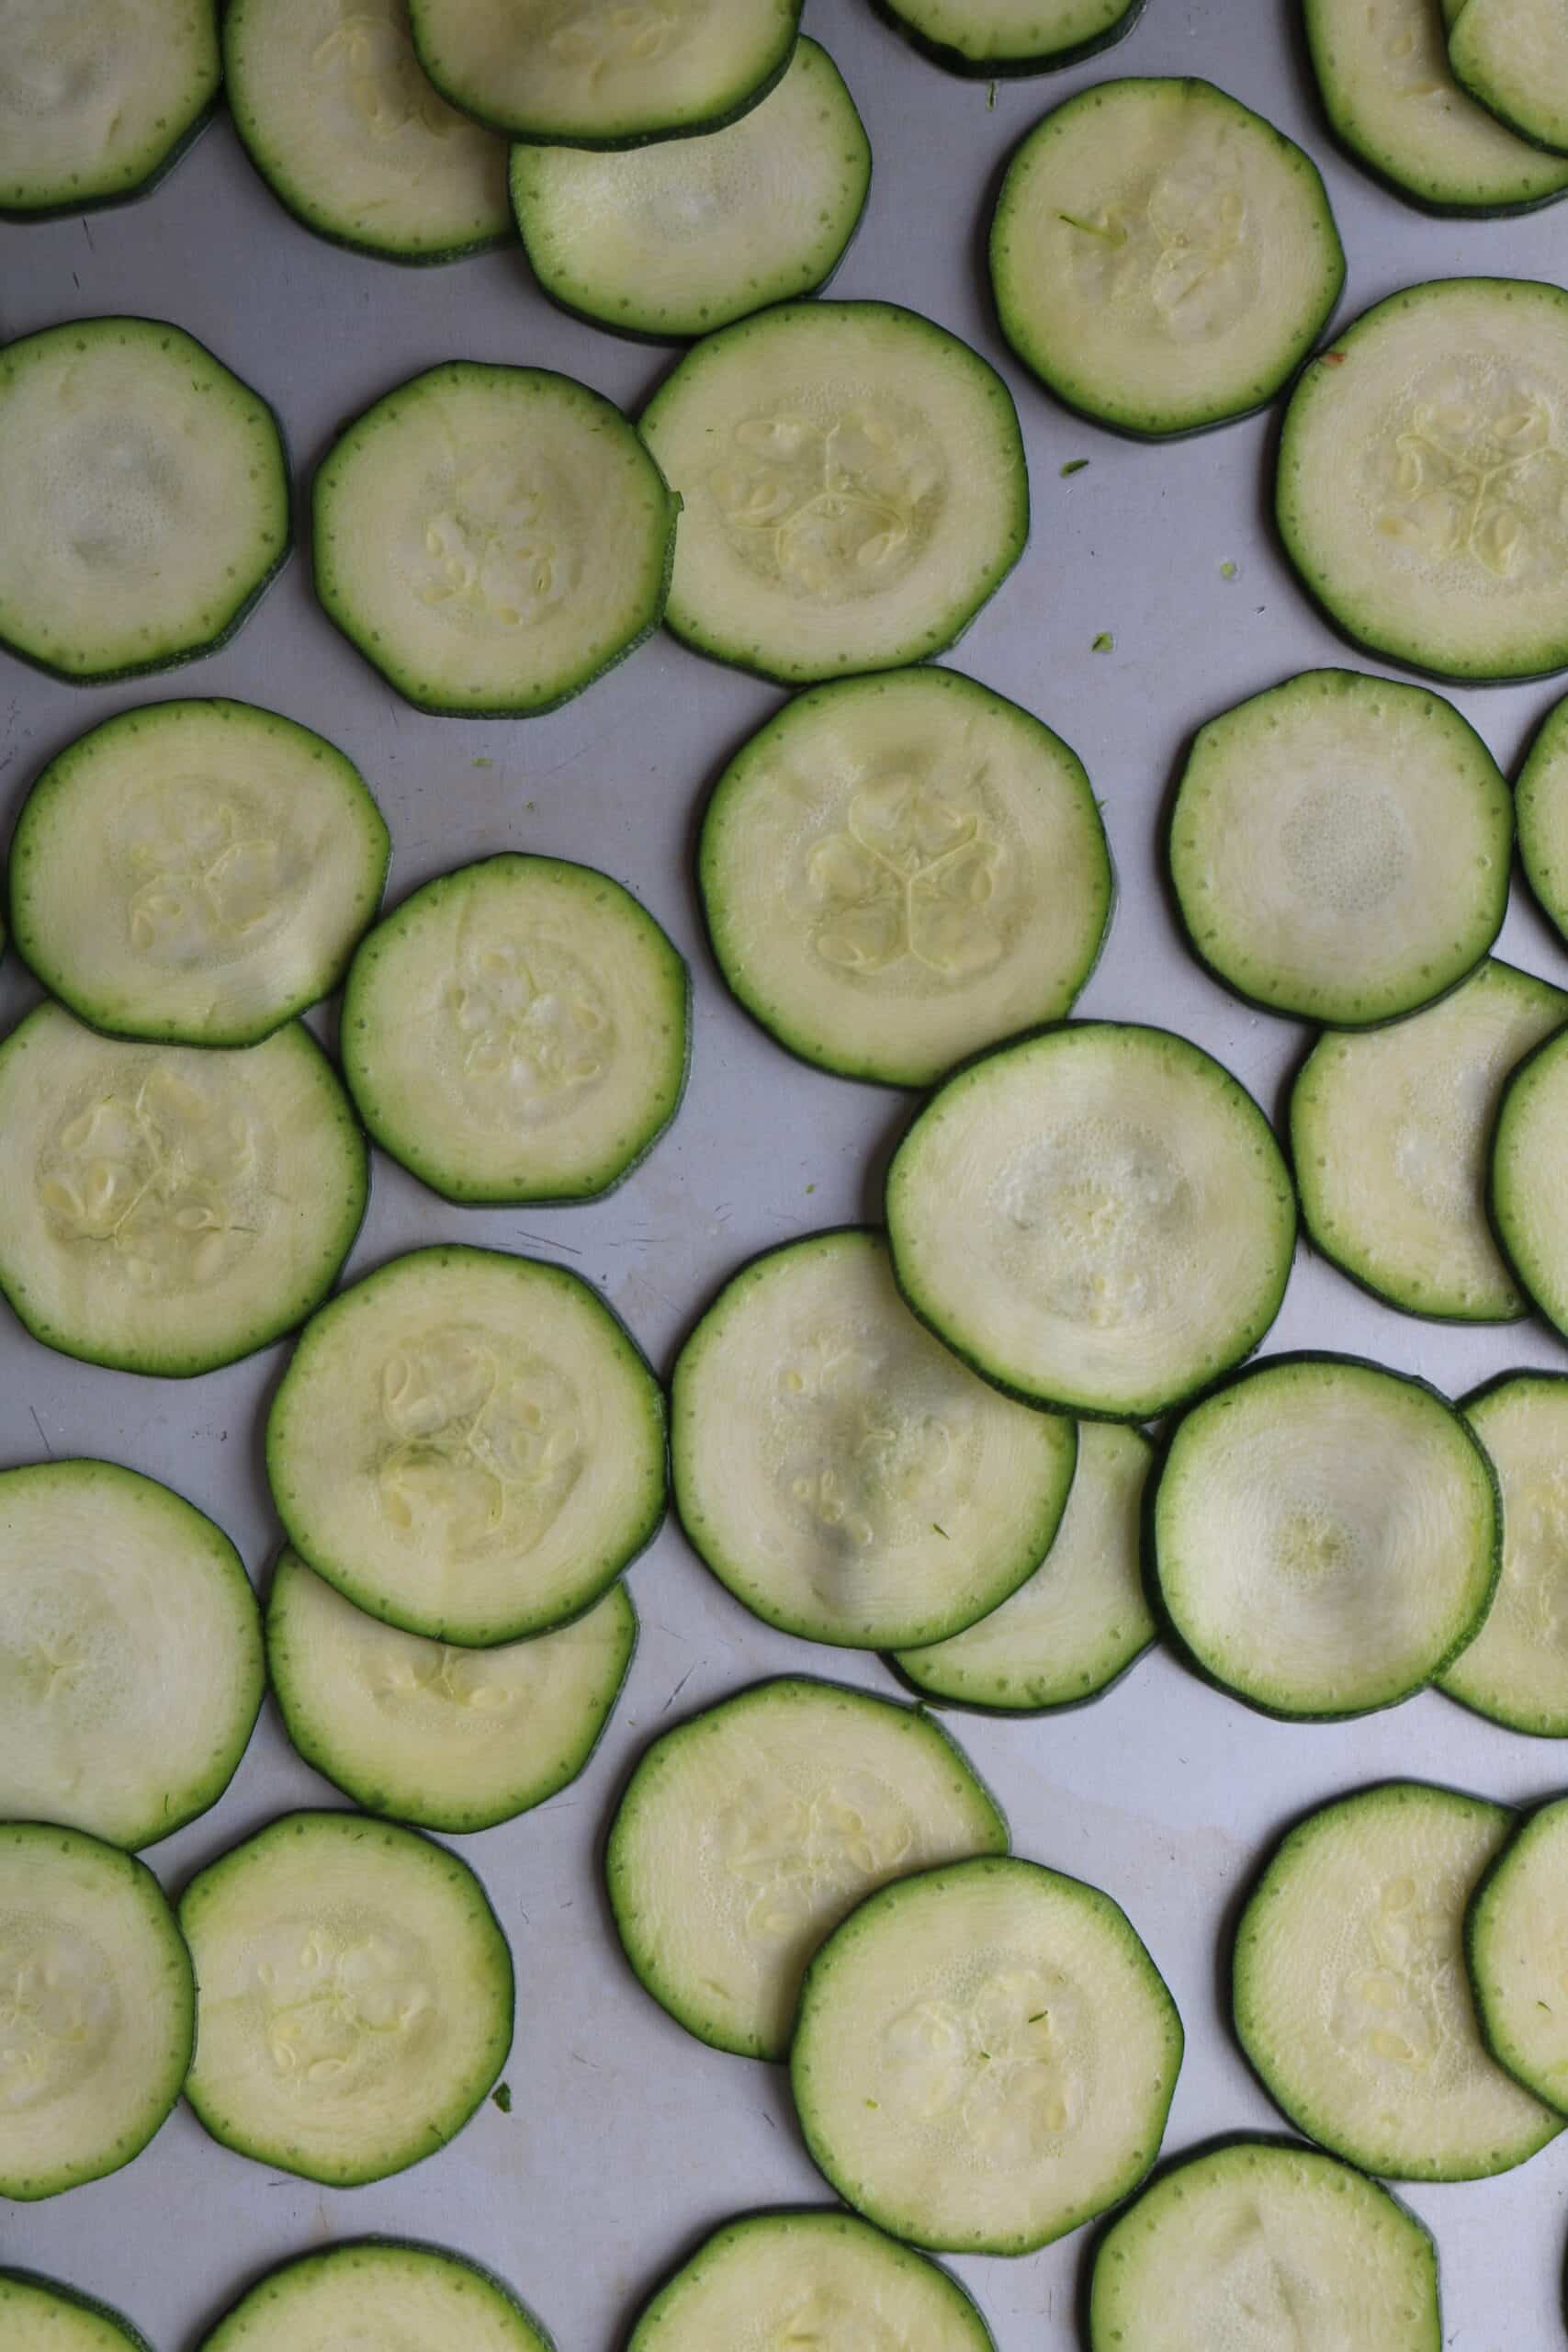 thinly sliced zucchini